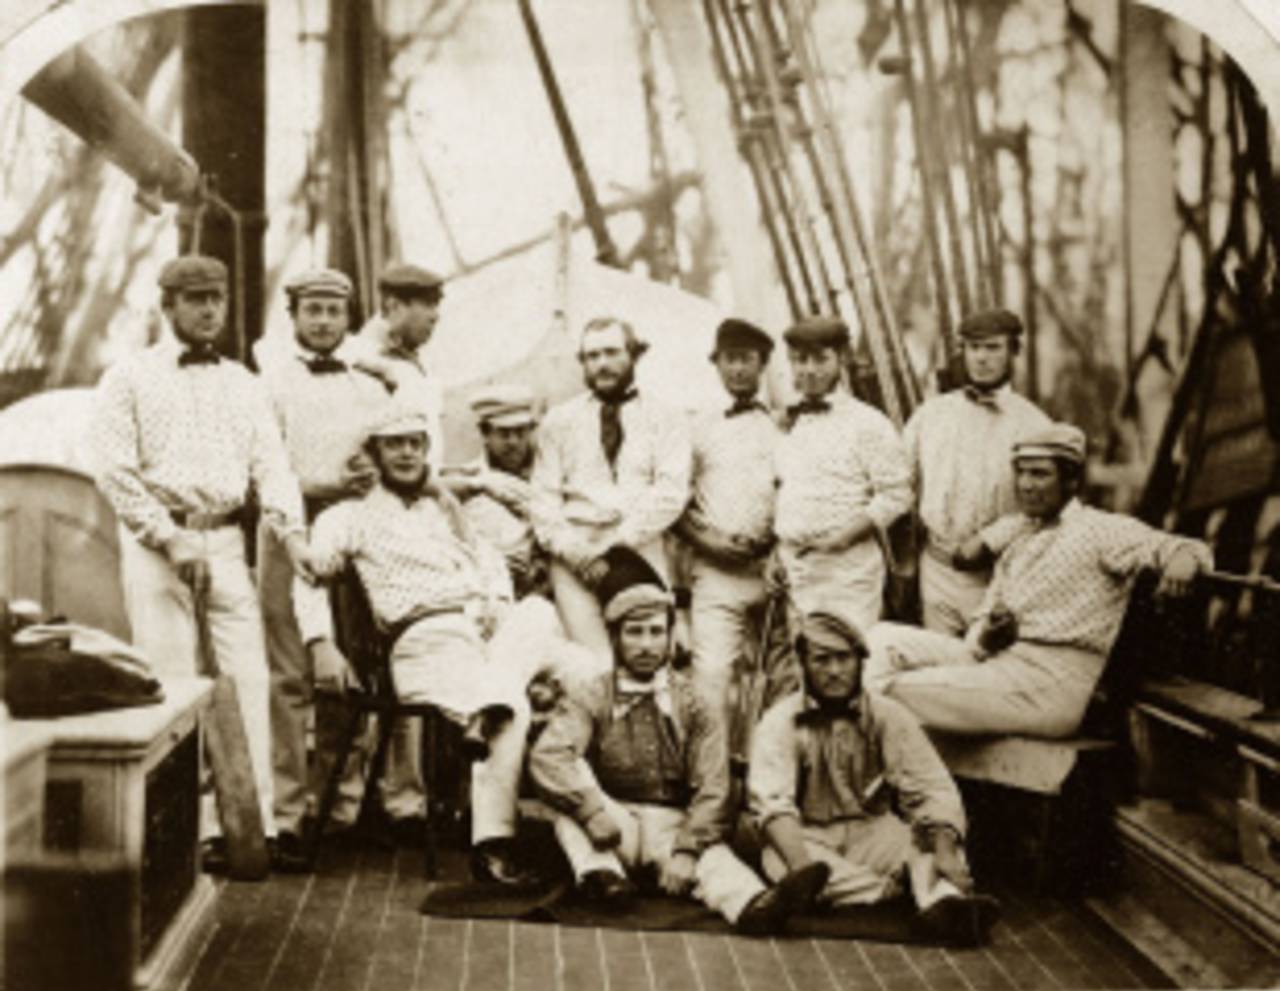 England's trailblazers - Back row (from left to right): Bob Carpenter, William Caflyn, Tom Lockyer, John Wisden (seated), HH Stephenson, George Parr, John Grundy, Julius Caesar, Tom Hayward and John Jackson. Seated at front: Alfred Diver and John Lillywhite.  This picture was taken the day before the squad left, but on board a different ship to the one they sailed on&nbsp;&nbsp;&bull;&nbsp;&nbsp;Getty Images